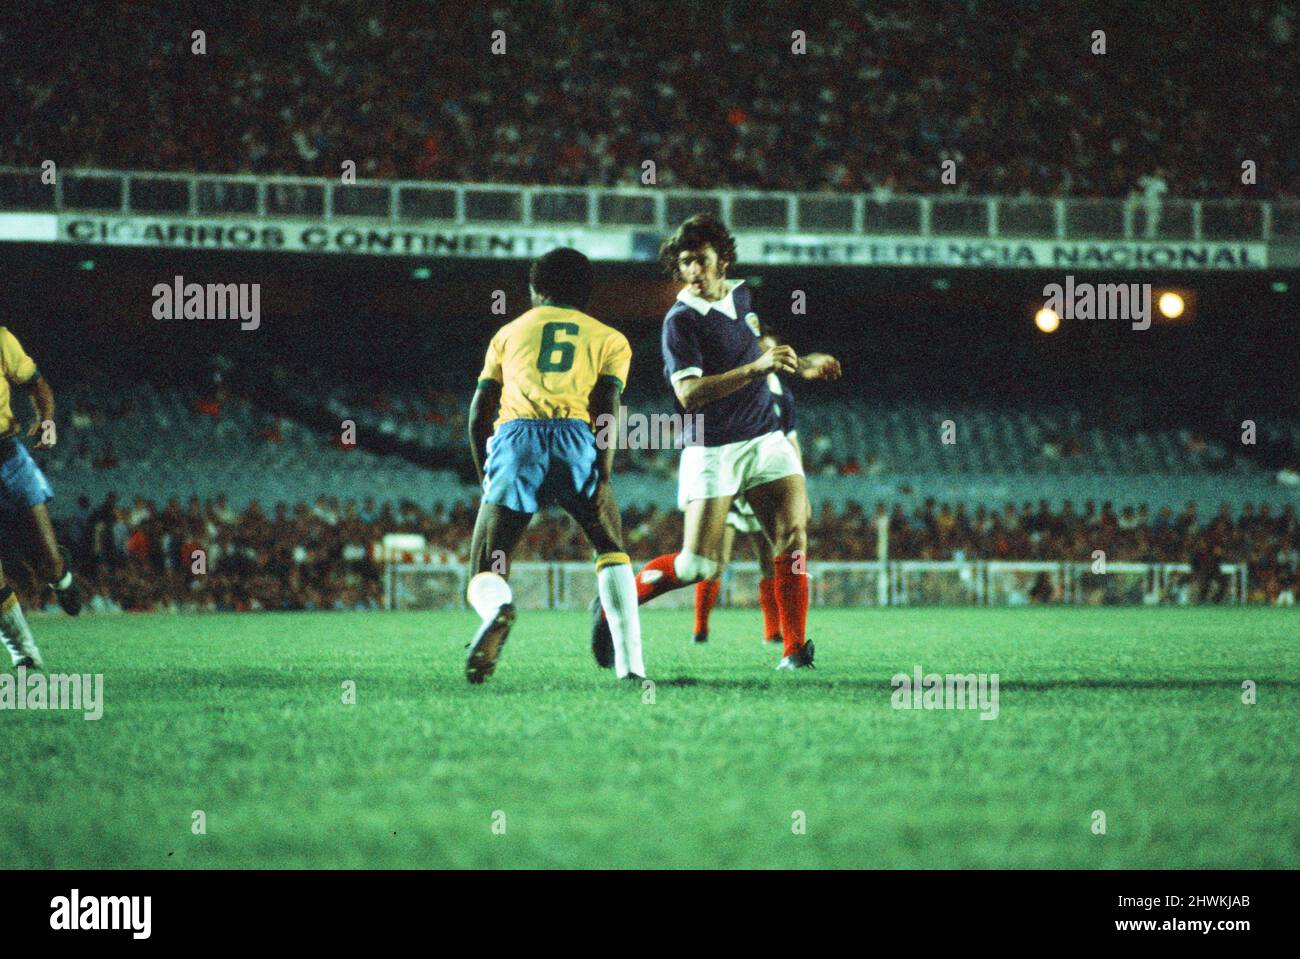 Brazil 1-0 Scotland, 1972 Brazil Independence Cup, final stage, Group A match at the Estadio do Maracana, Rio de Janeiro, Brazil, Wednesday 5th July 1972. Pictured, Willie Morgan in action during the match. Stock Photo